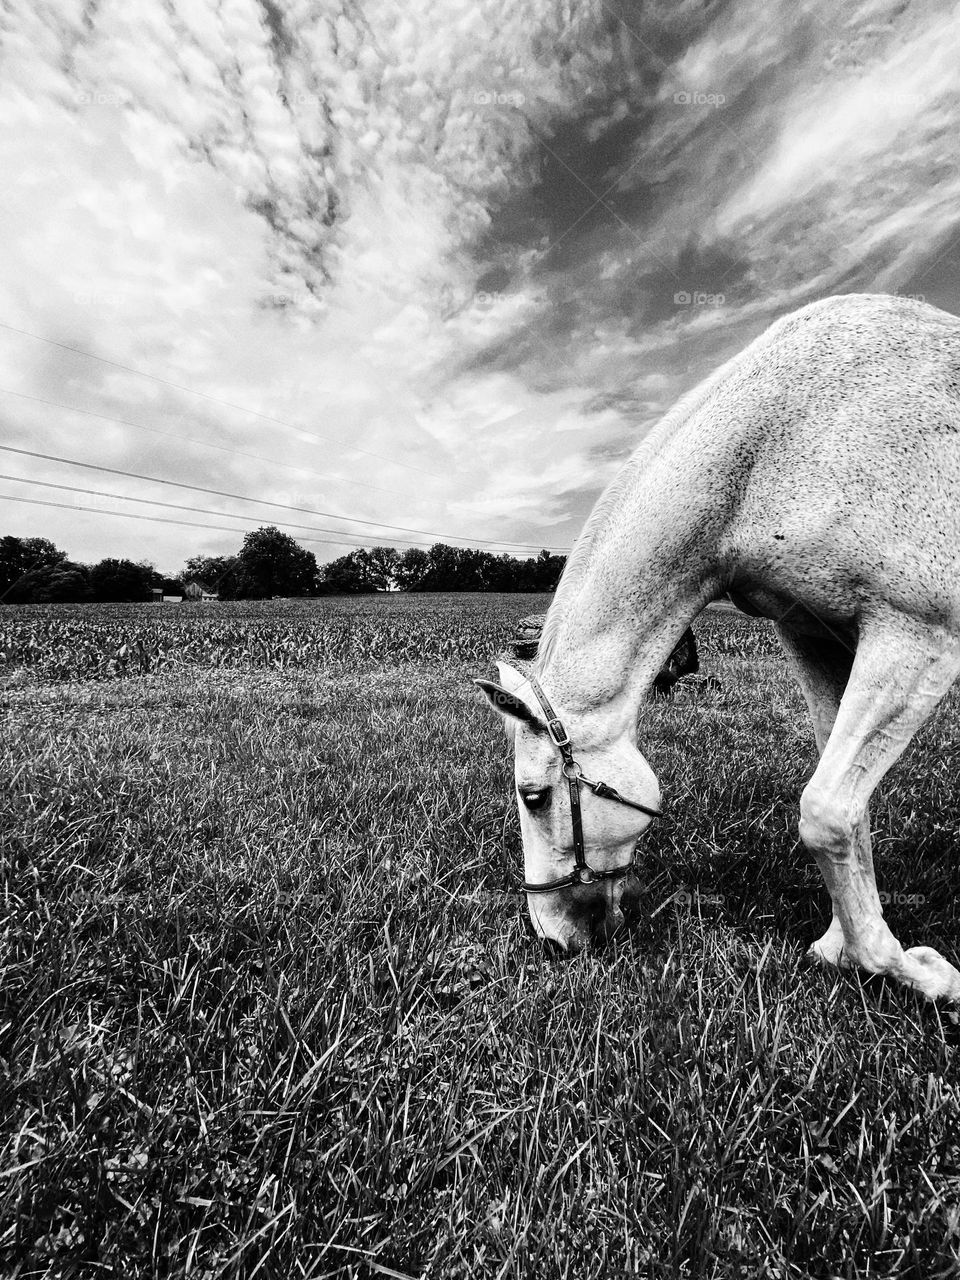 Horse eating grass peacefully while the sky displays beautiful cloud formations on a nice spring day